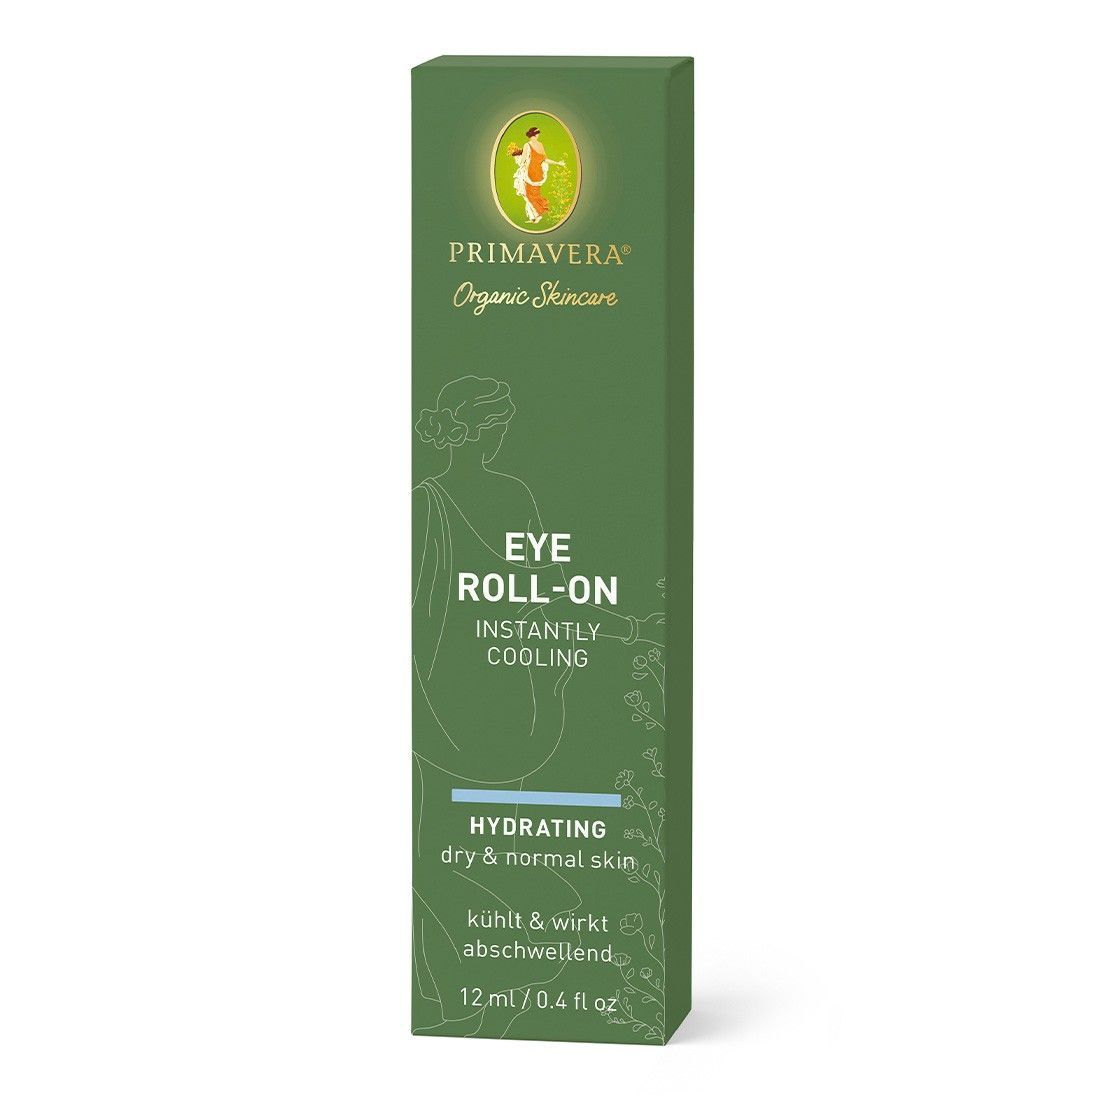 PRIMAVERA® Eye Roll-On Instantly Cooling